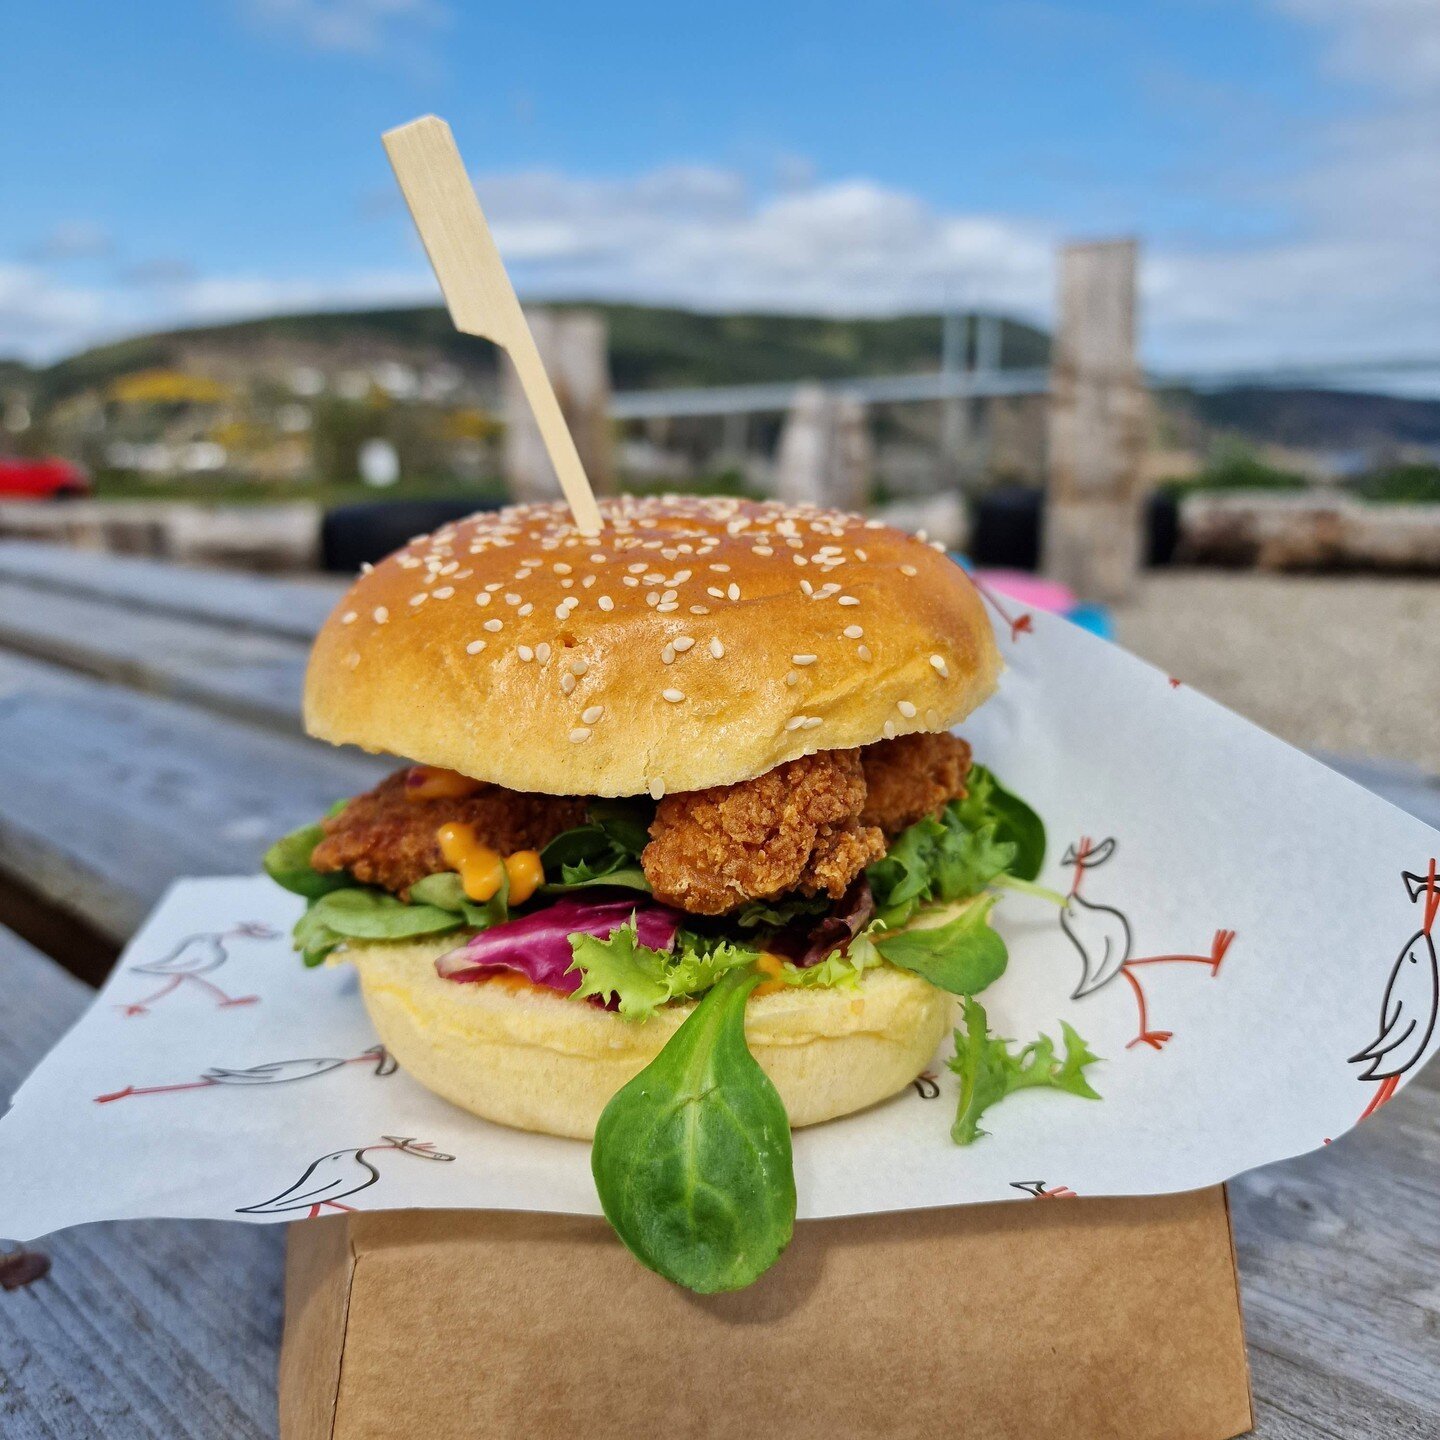 A glorious day in the Highlands capital 🌞 
It might be true, summer is a coming 😏 

And a great day for a buttermilk chicken burger with a Korean BBQ sauce down by the Inverness marina 😋 
And maybe finish it with a cheeky soft serve ice cream 

Op